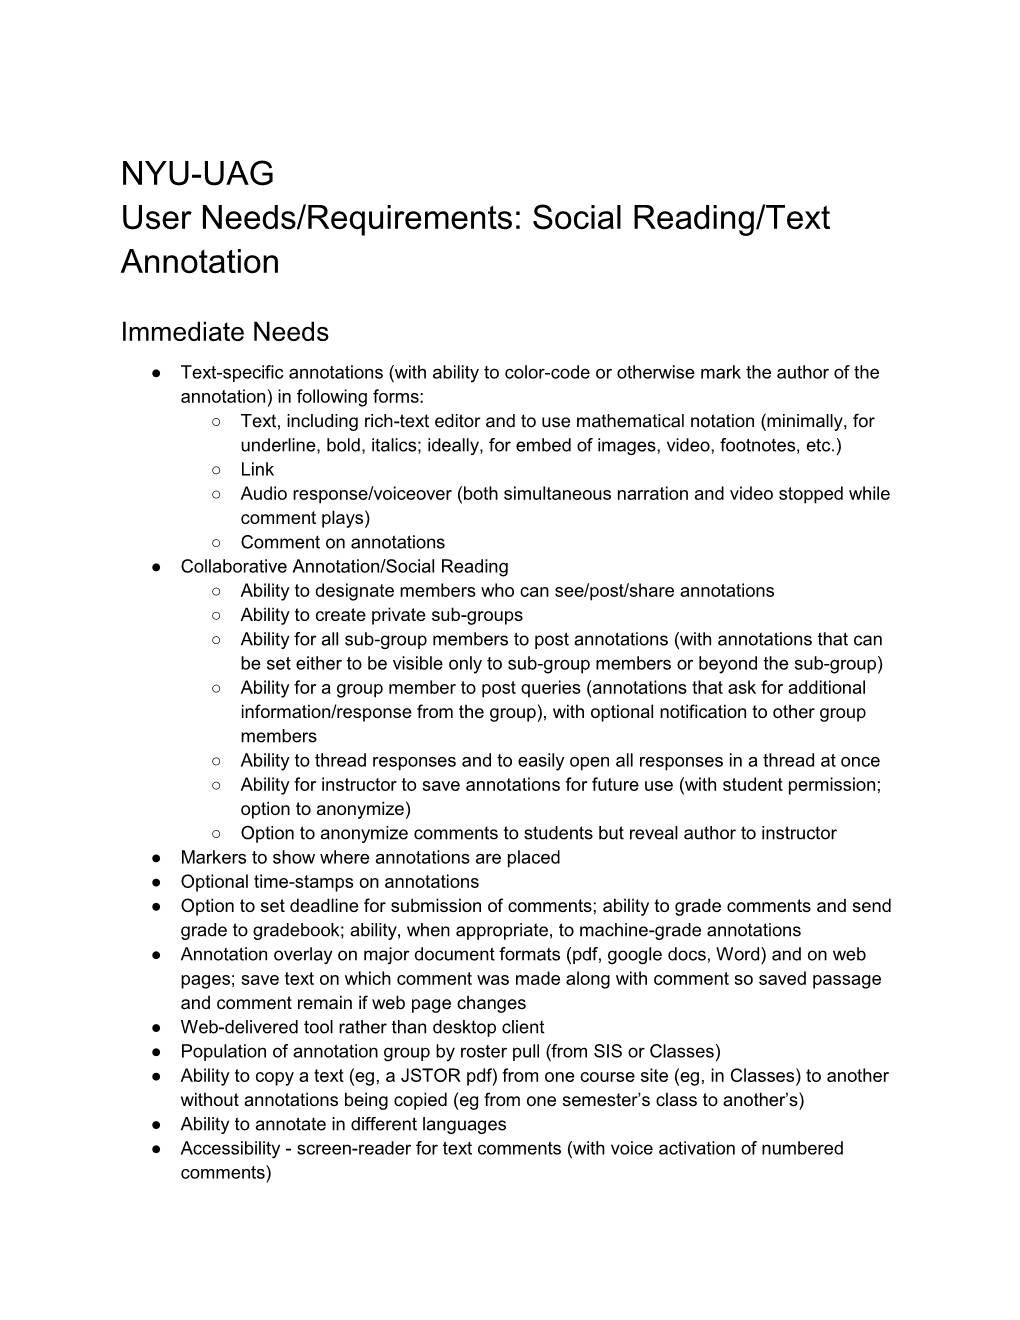 User Needs/Requirements: Social Reading/Text Annotation